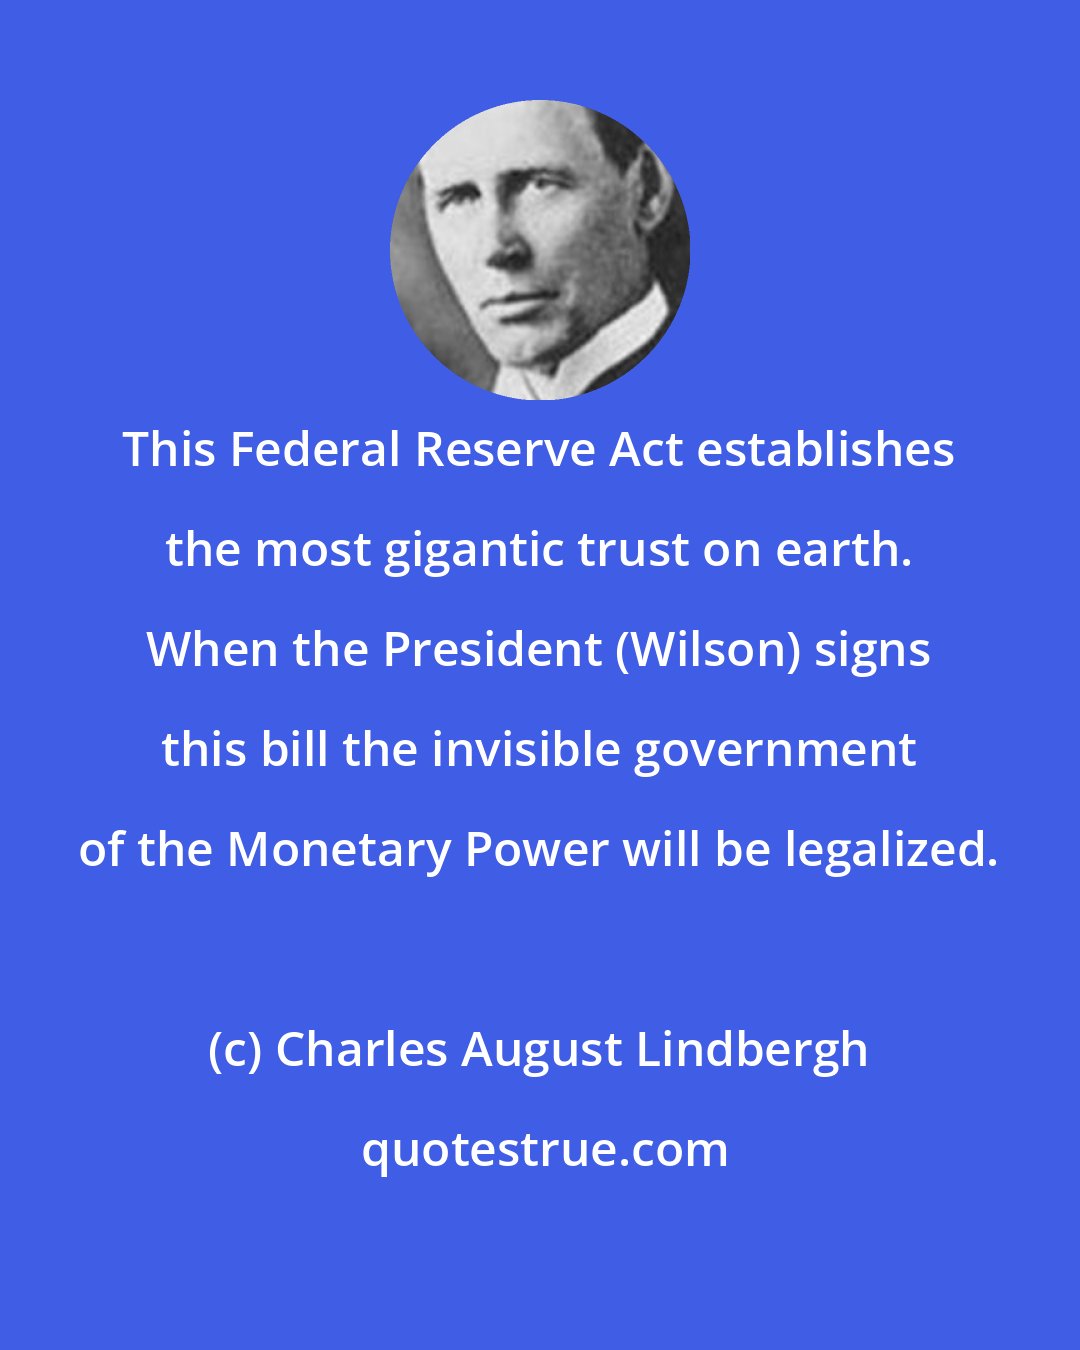 Charles August Lindbergh: This Federal Reserve Act establishes the most gigantic trust on earth. When the President (Wilson) signs this bill the invisible government of the Monetary Power will be legalized.